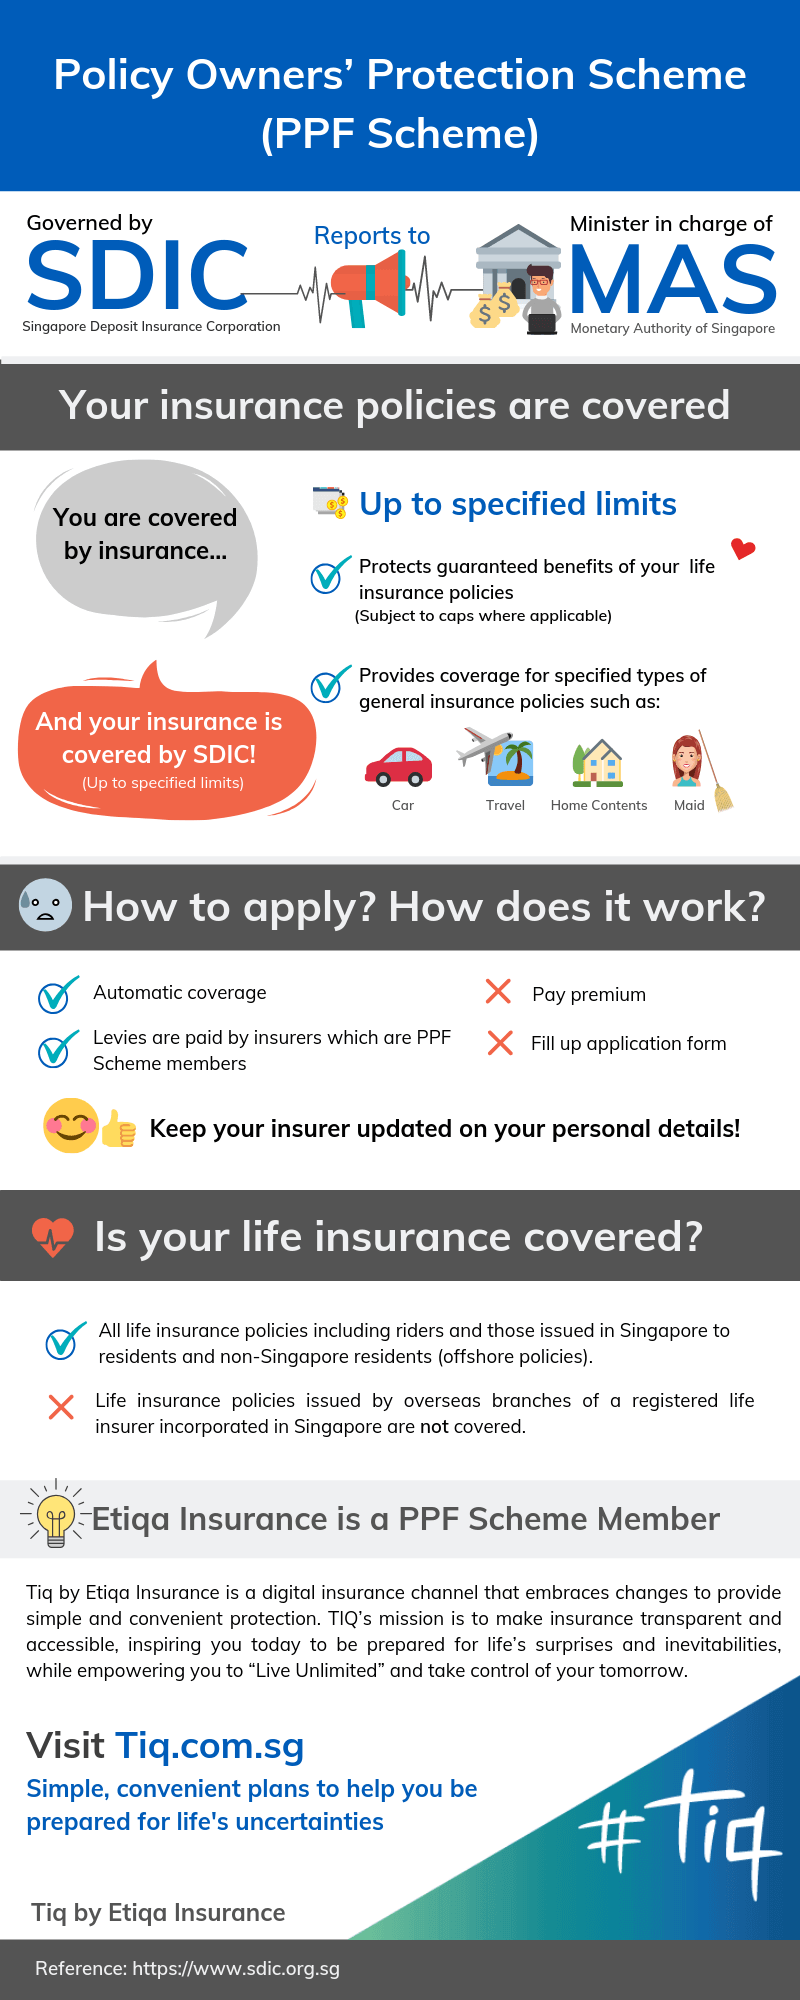 PPF scheme infographic (a creation of Tiq by Etiqa Insurance)